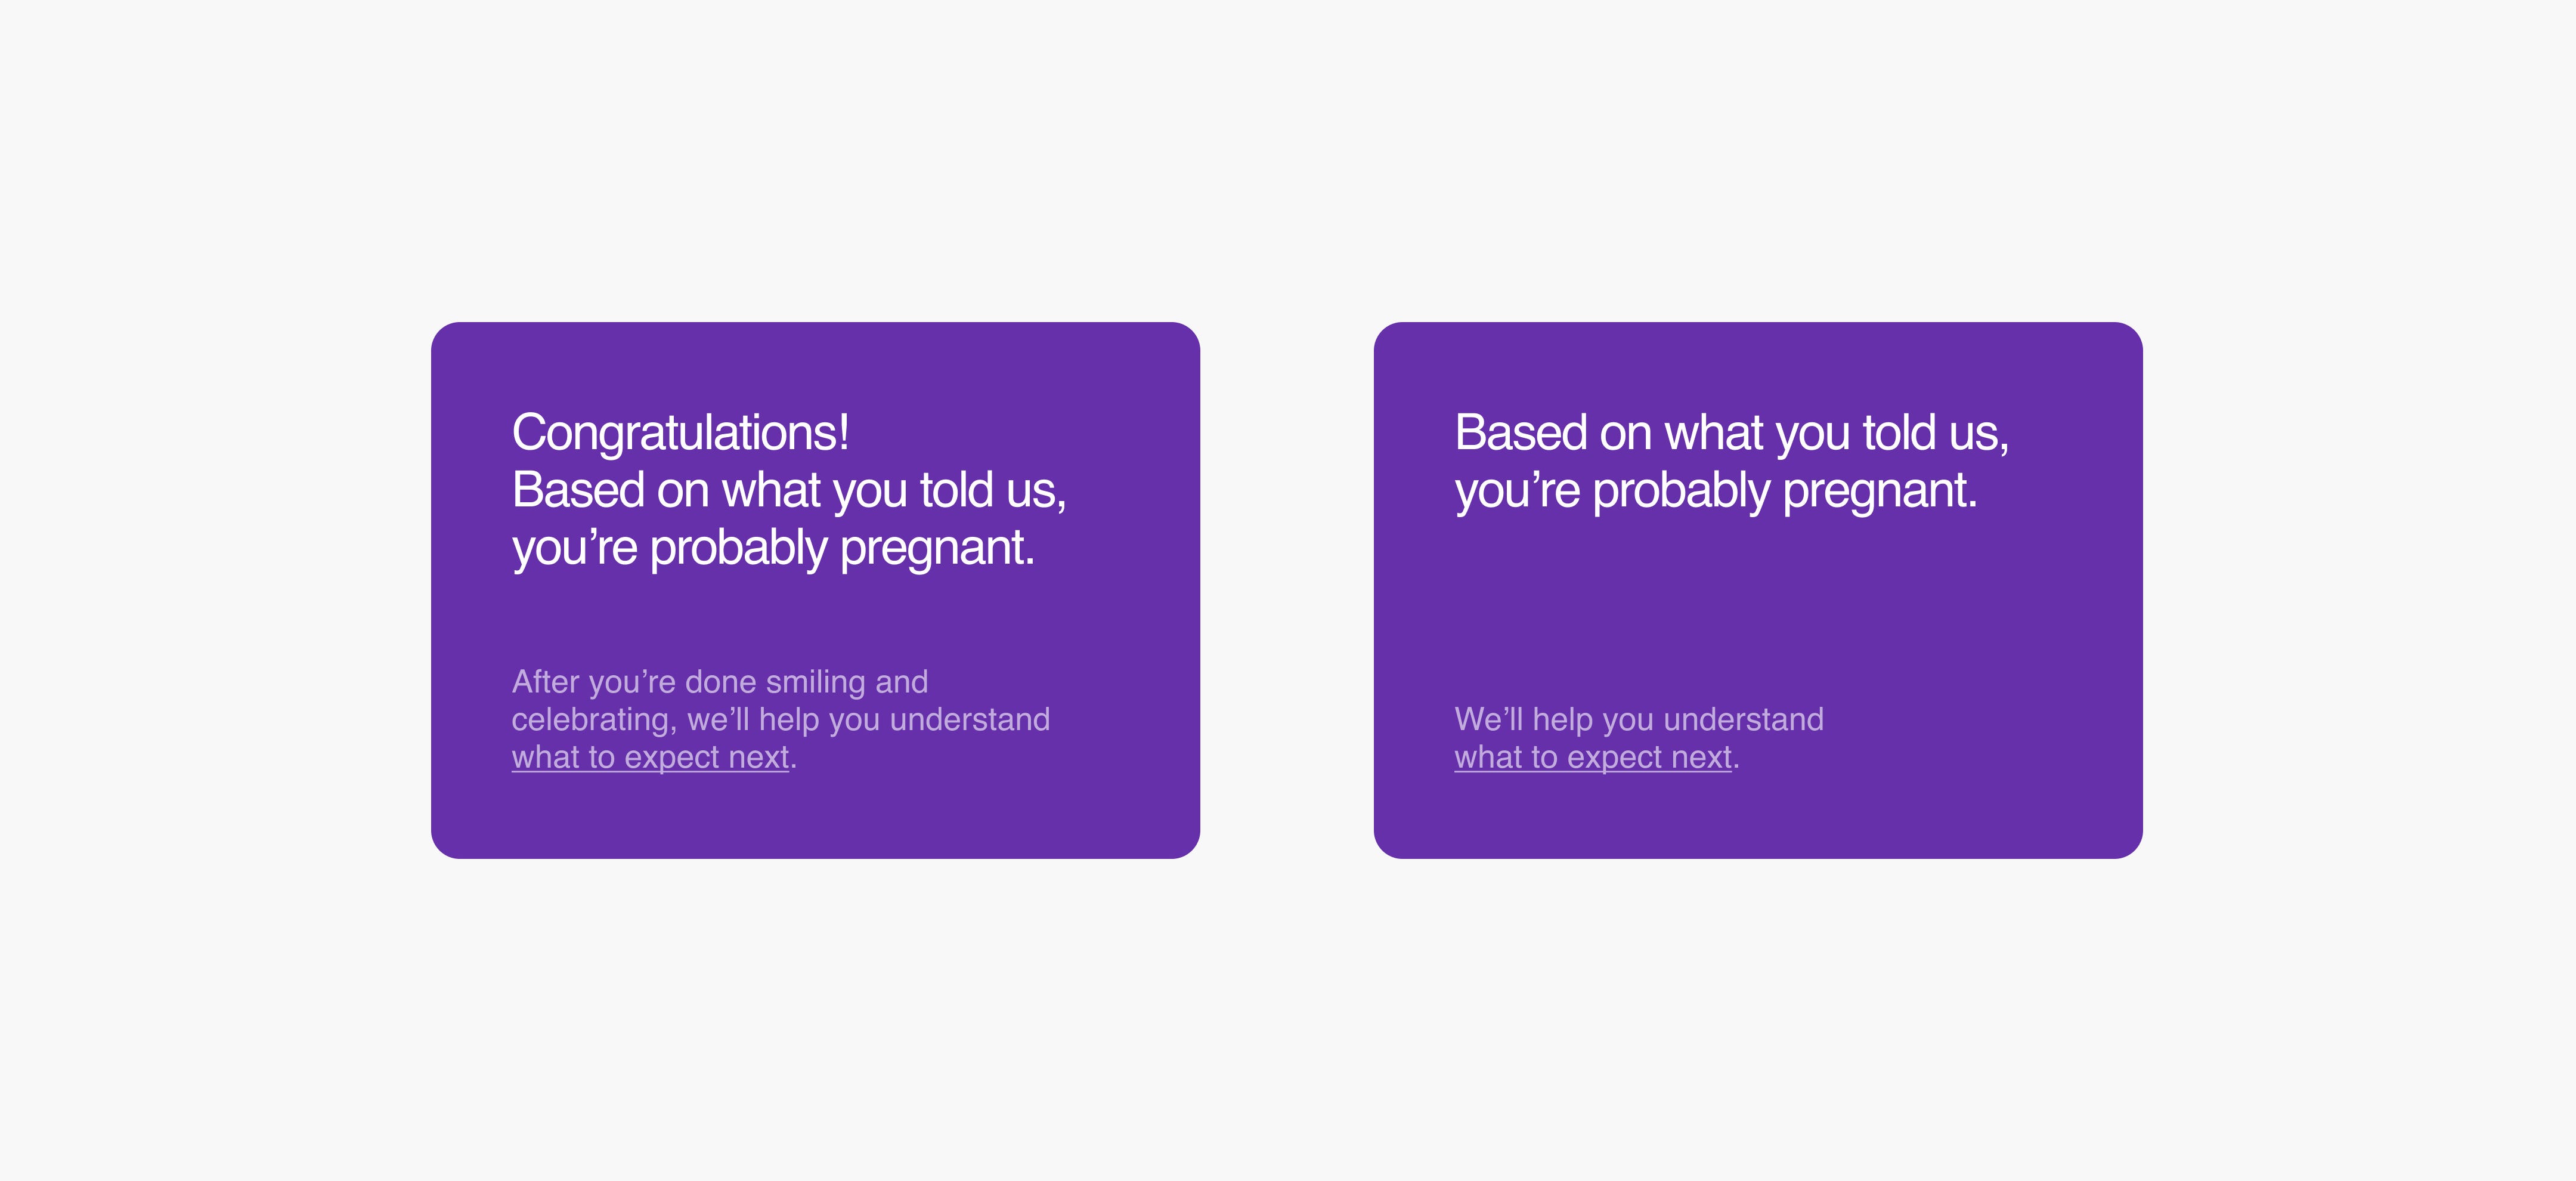 One screen talks about a pregnancy with words like congratulations, smile, and celebrate. The other speaks more matter-of-factly to include users who might be trying to avoid a pregnancy.